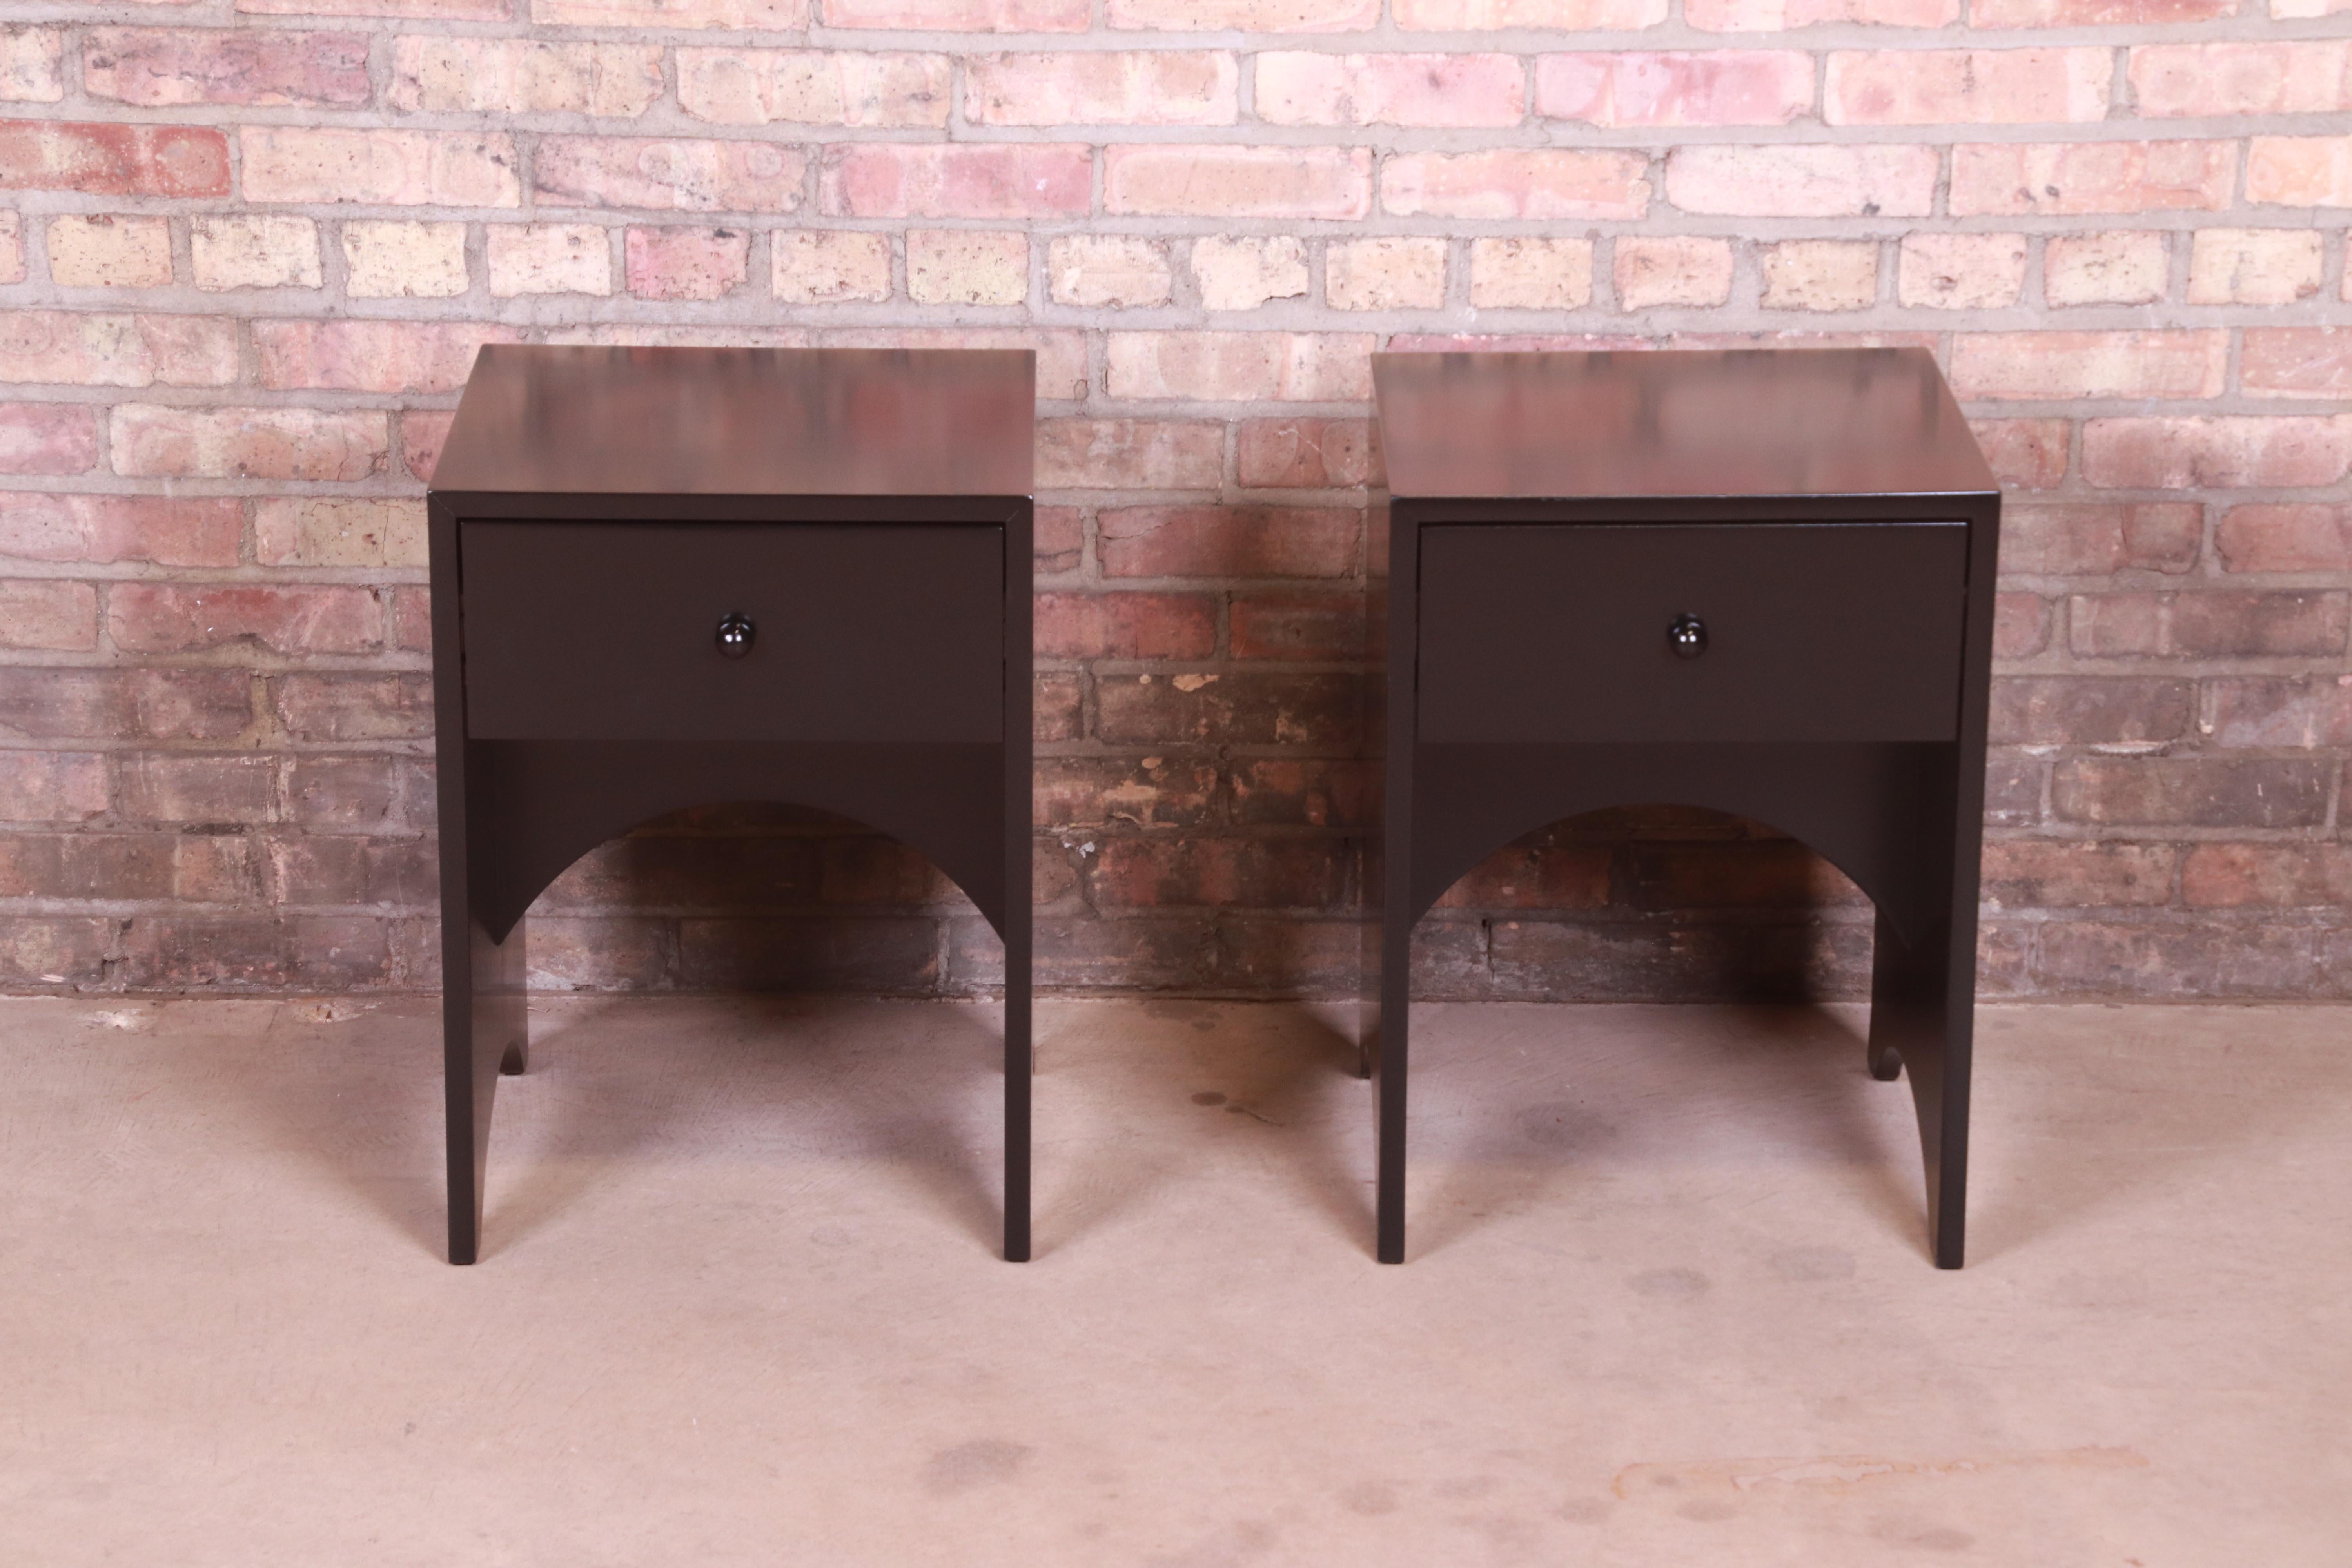 20th Century Sergio Savarese for Dialogica Modern Black Lacquered Nightstands, Refinished